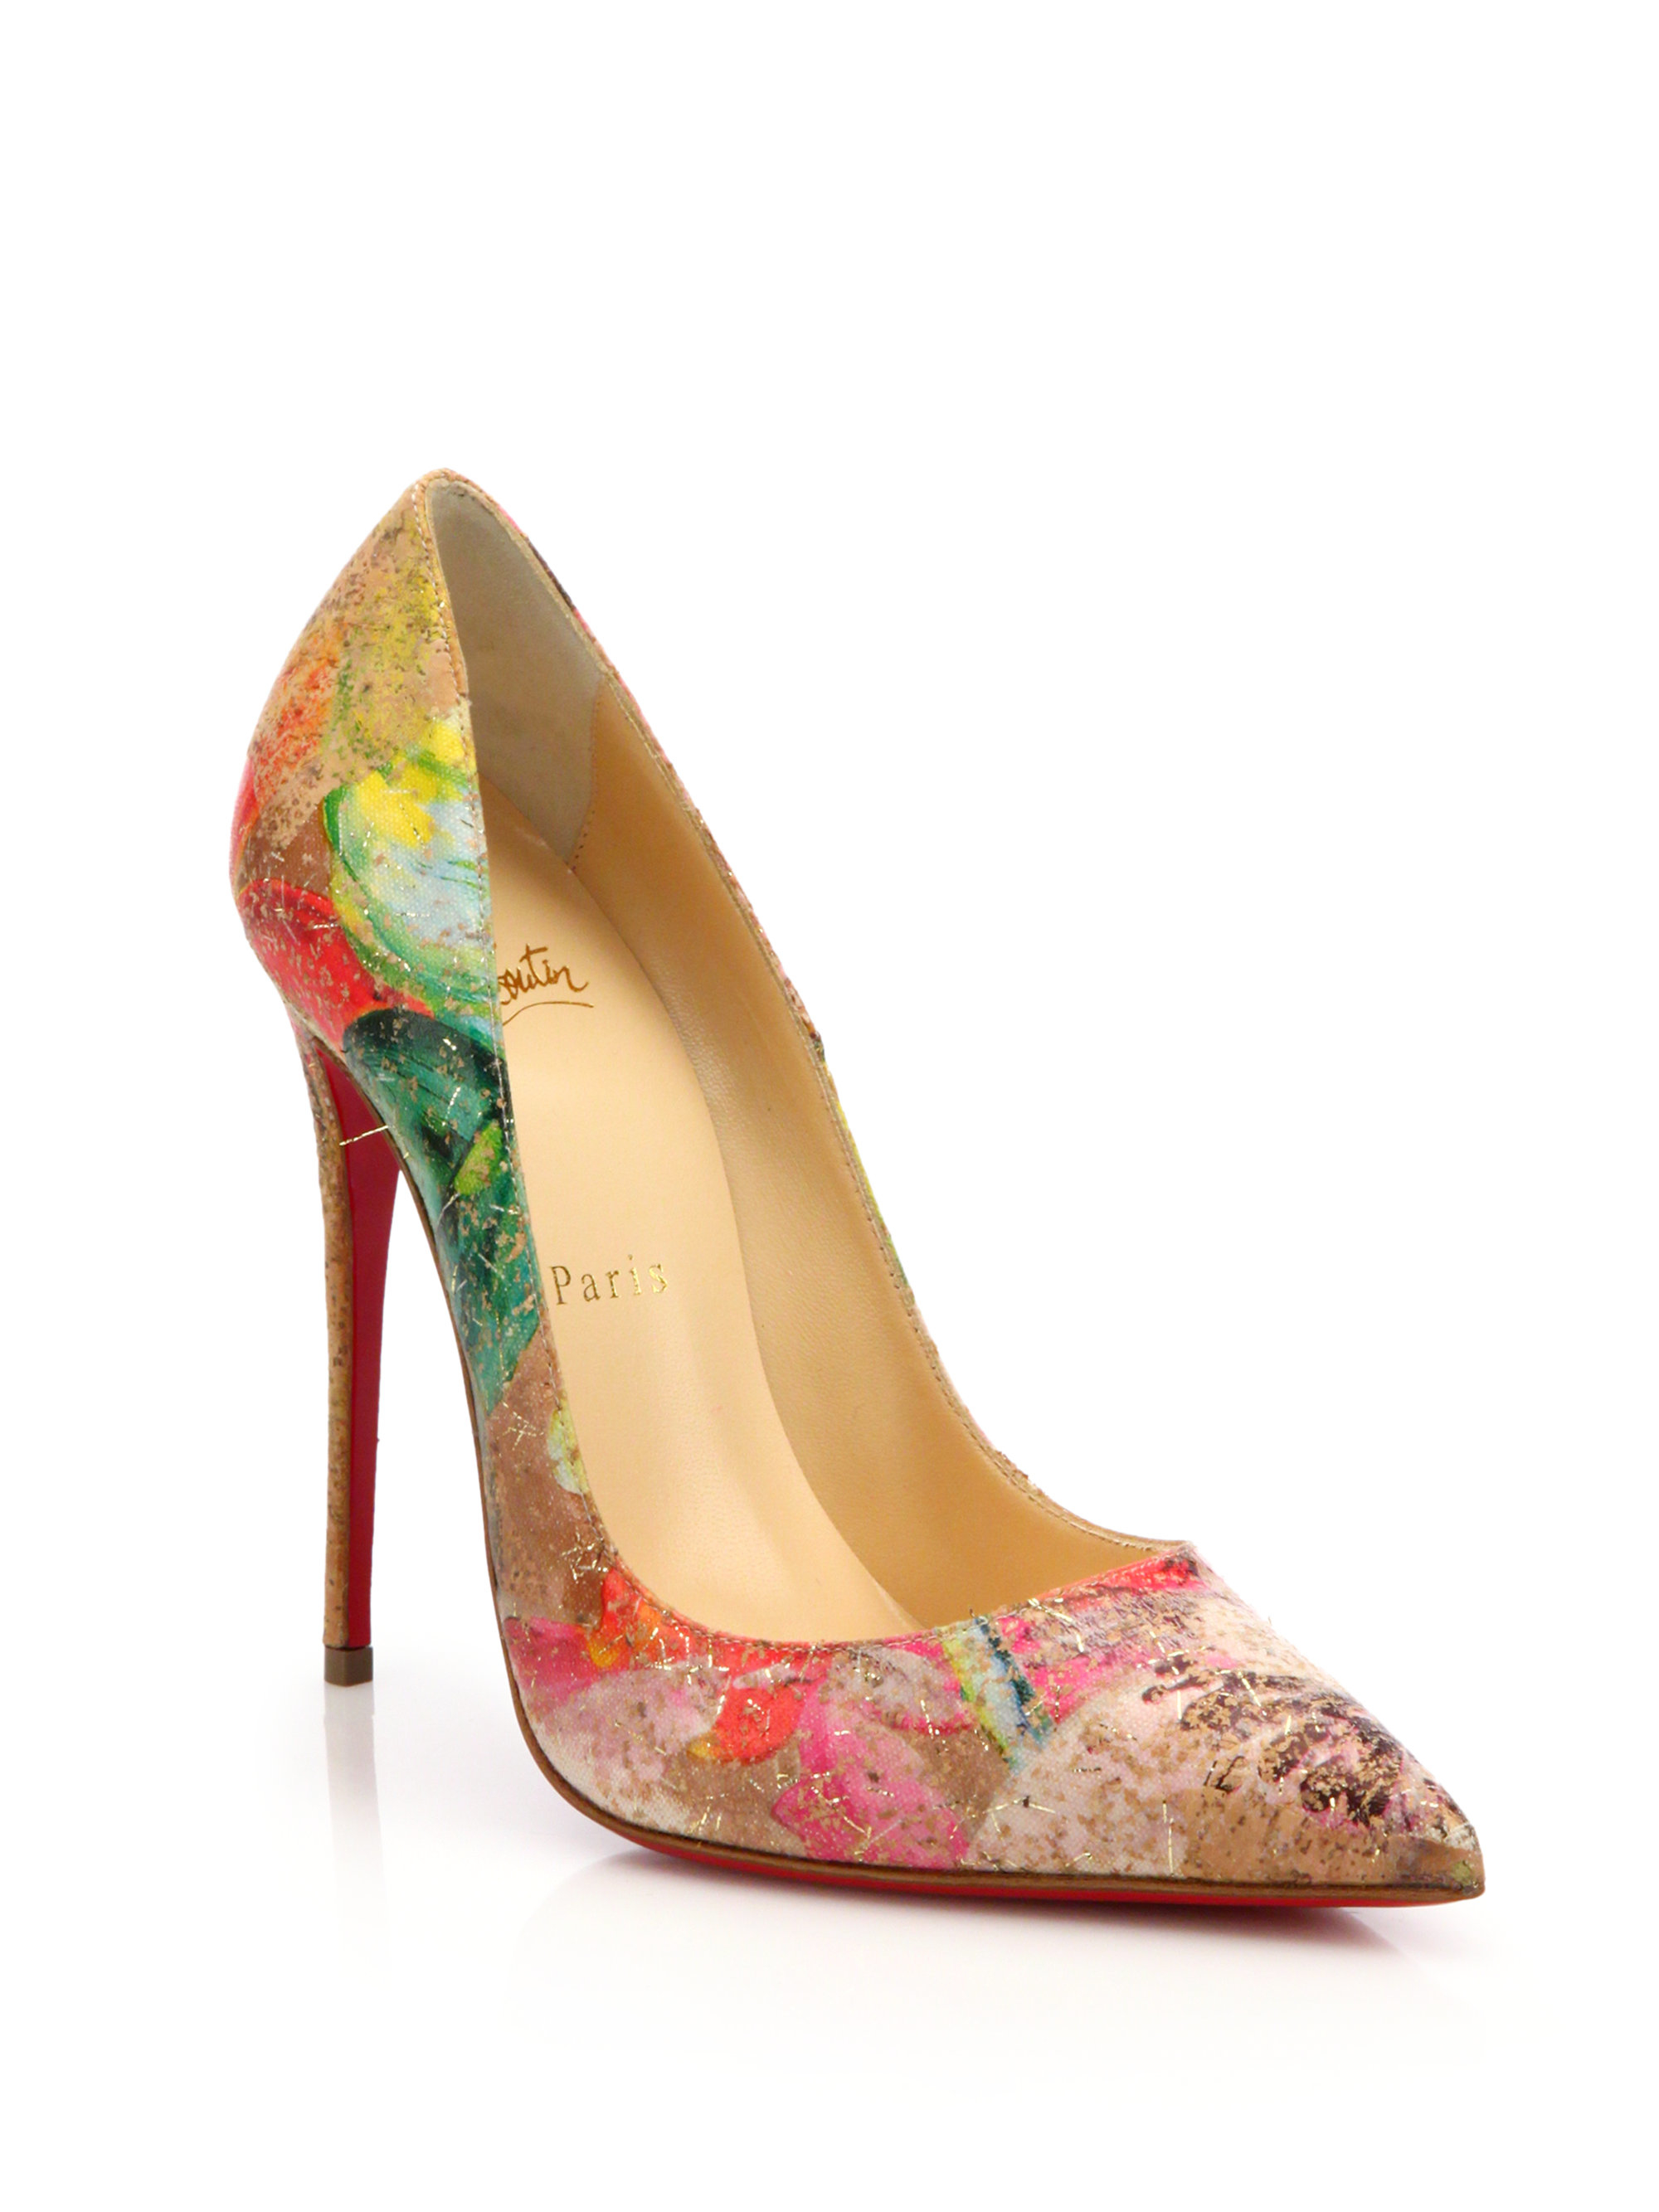 christian louboutin discount shoes - Christian louboutin So Kate Marble-Print Cork Pumps in Multicolor ...